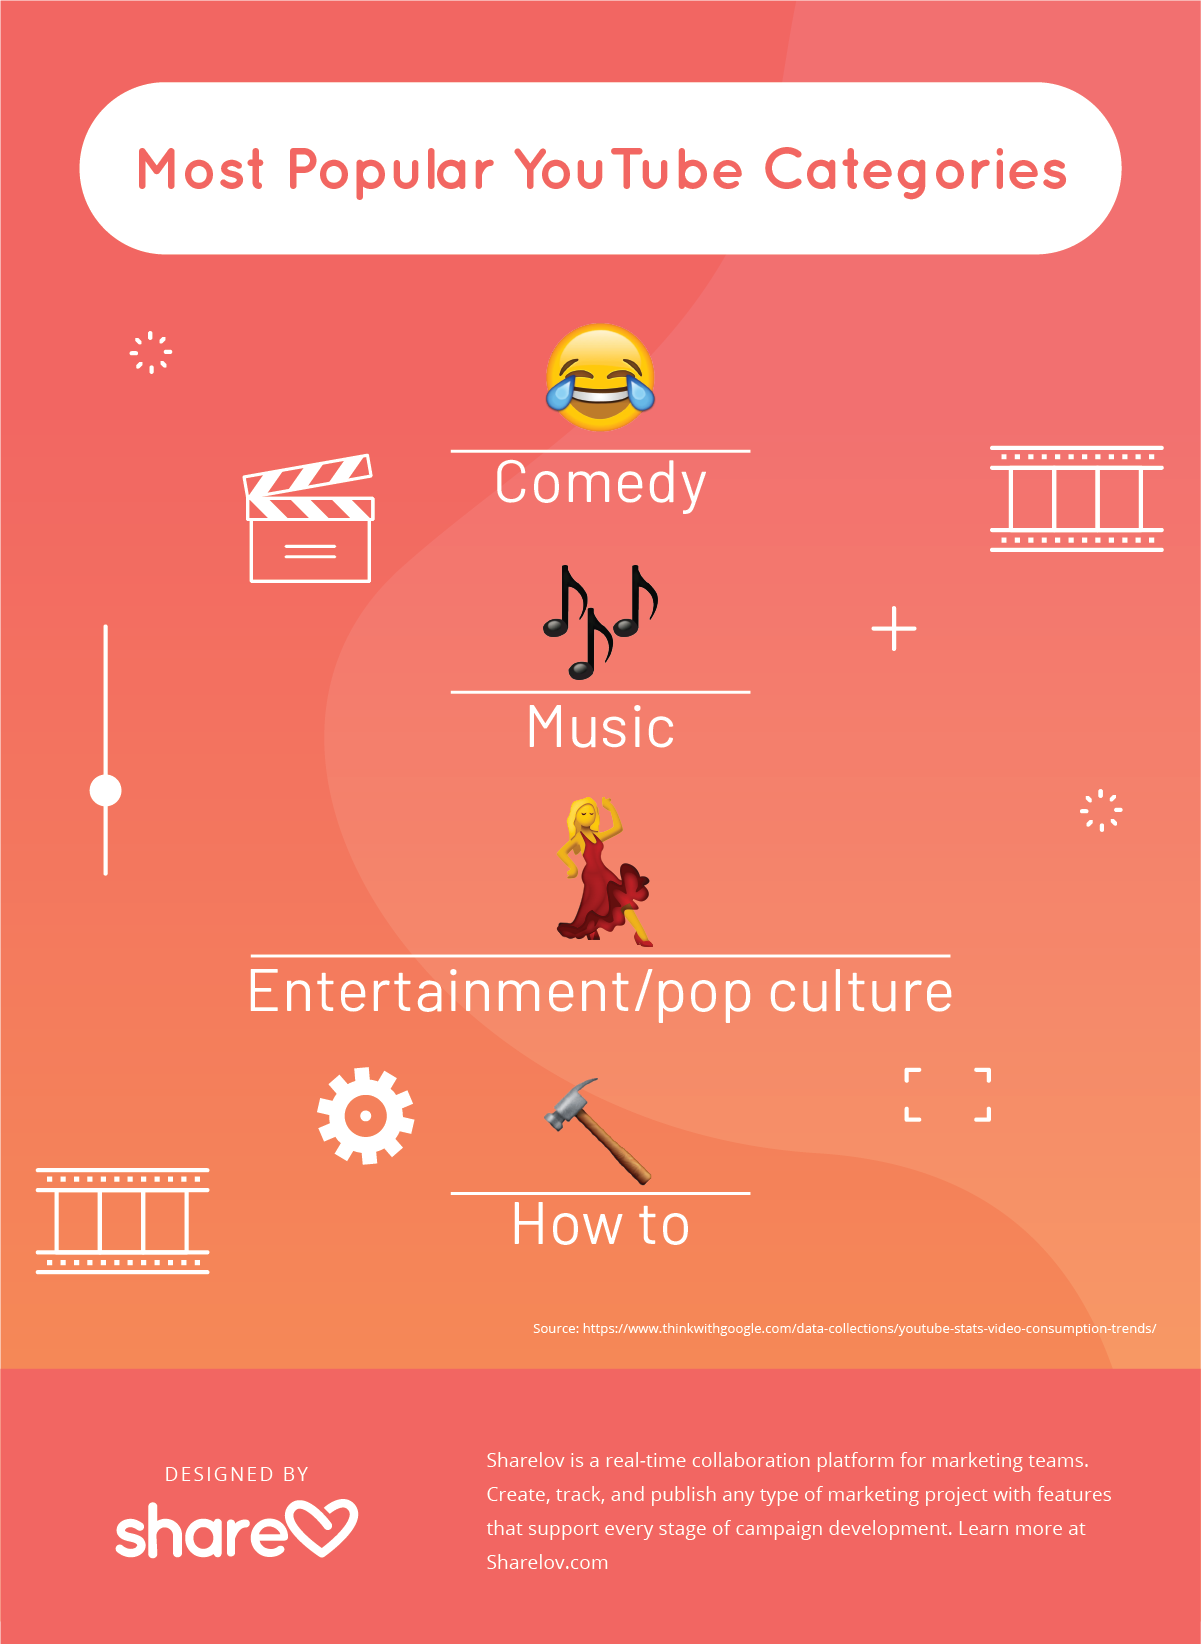 Most Popular YouTube Categories - Infographic